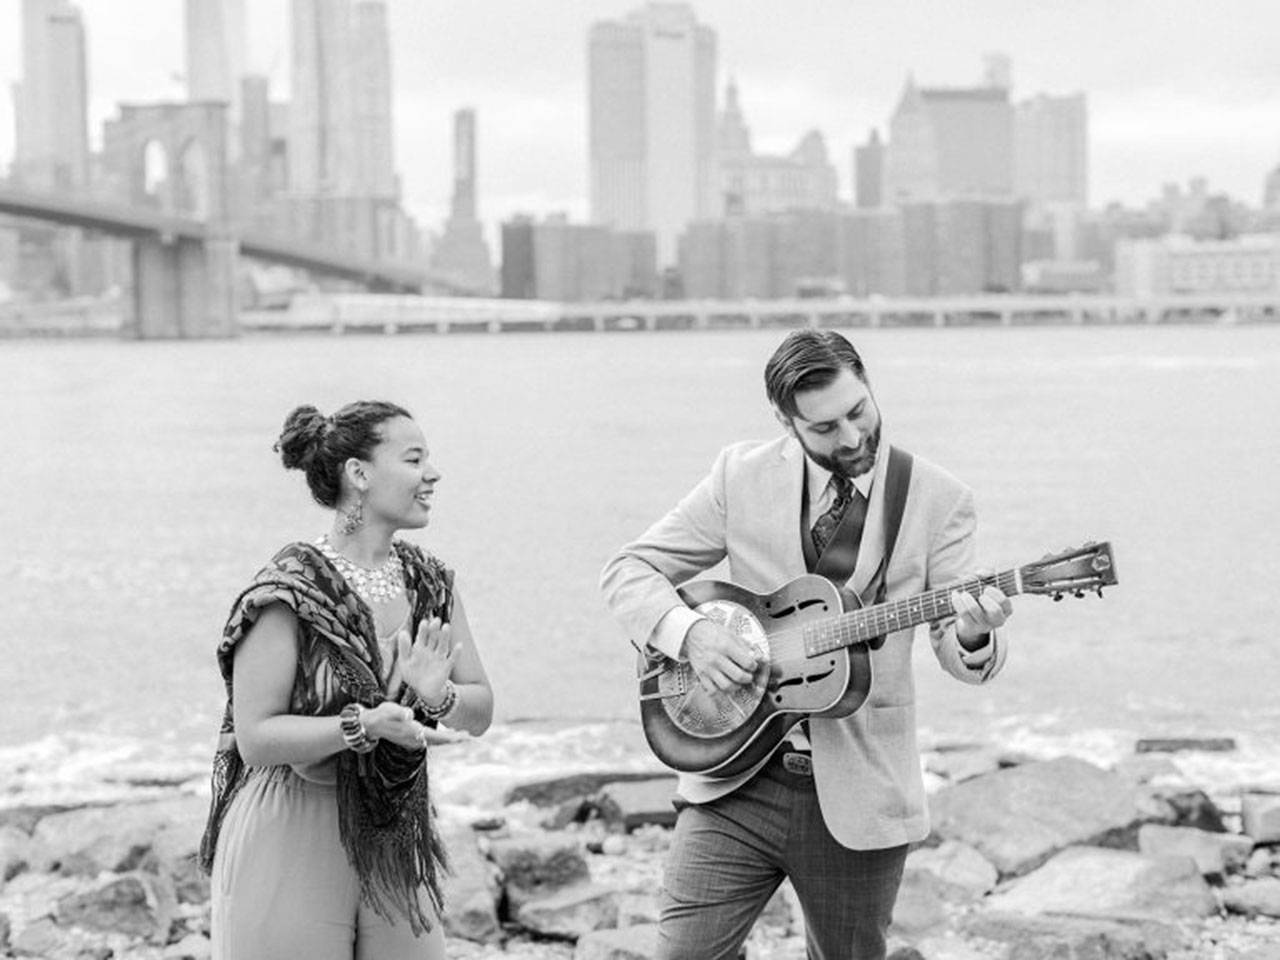 Photo courtesy of the Treehouse Café | The musical duo of Briar and Joe Seamons will perform at the Treehouse Café at 8 p..m. Friday, Dec. 6.